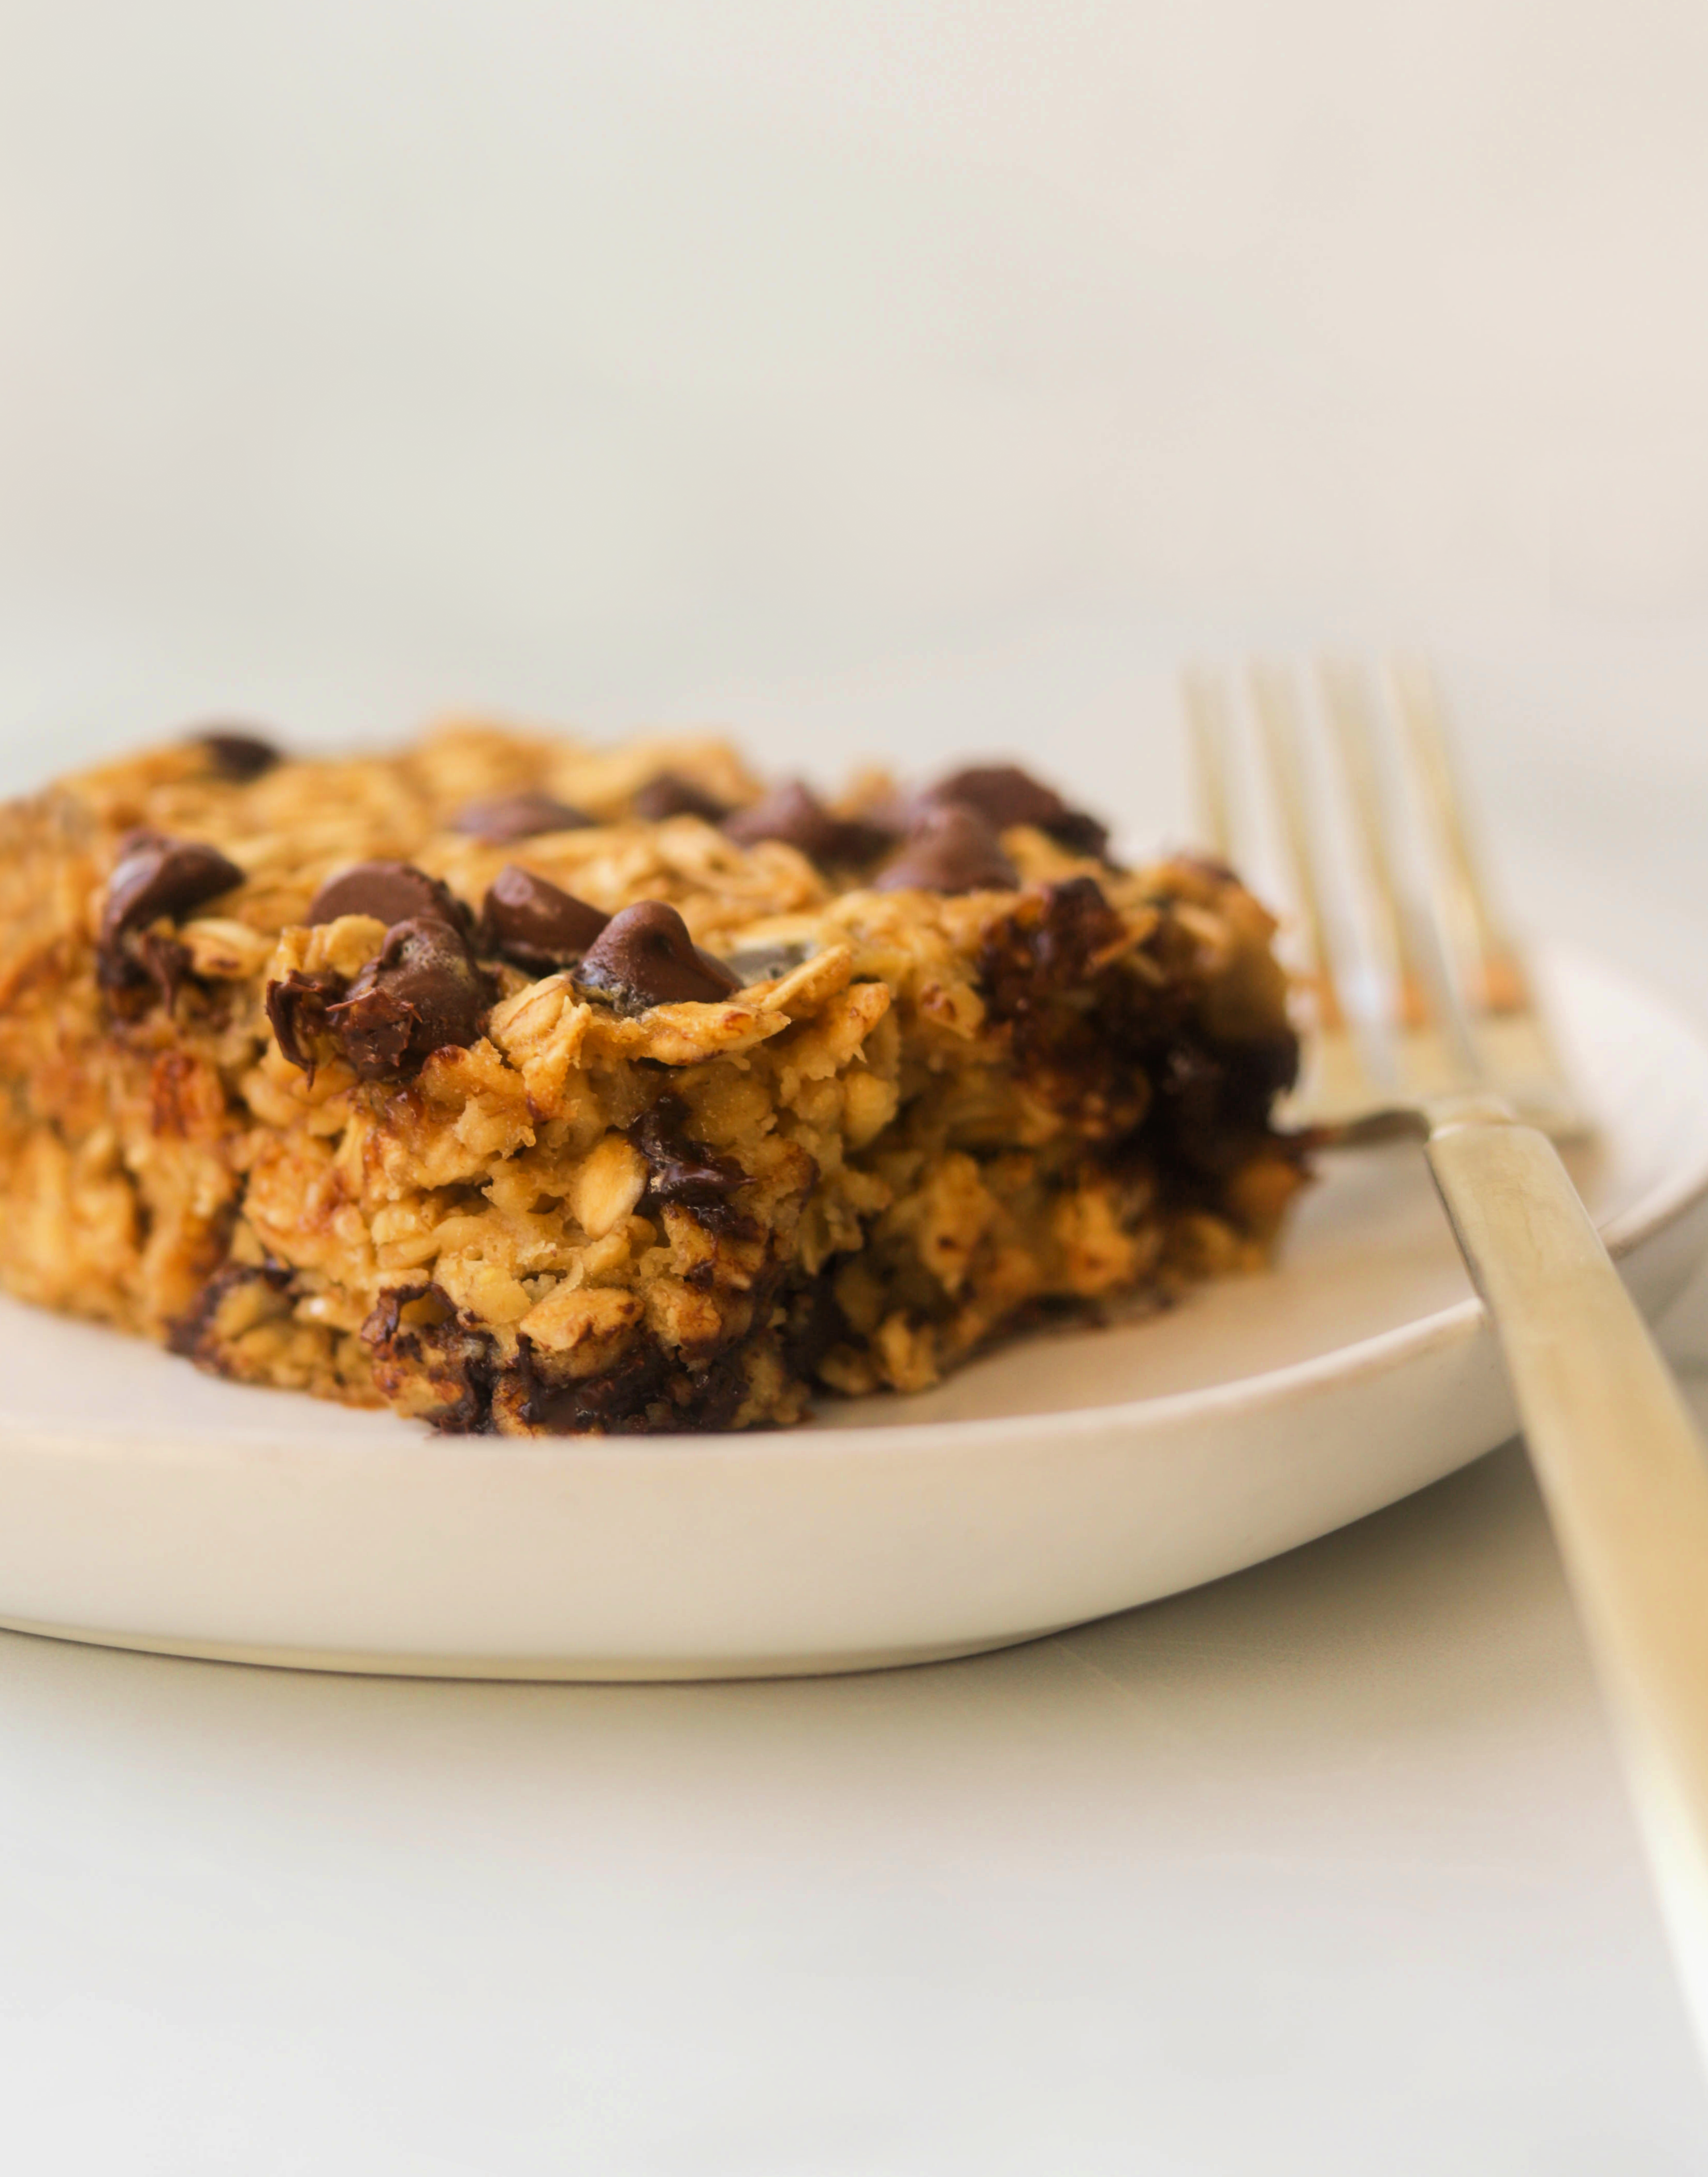 A side shot of chocolate chip baked oats on a white plate with a fork.